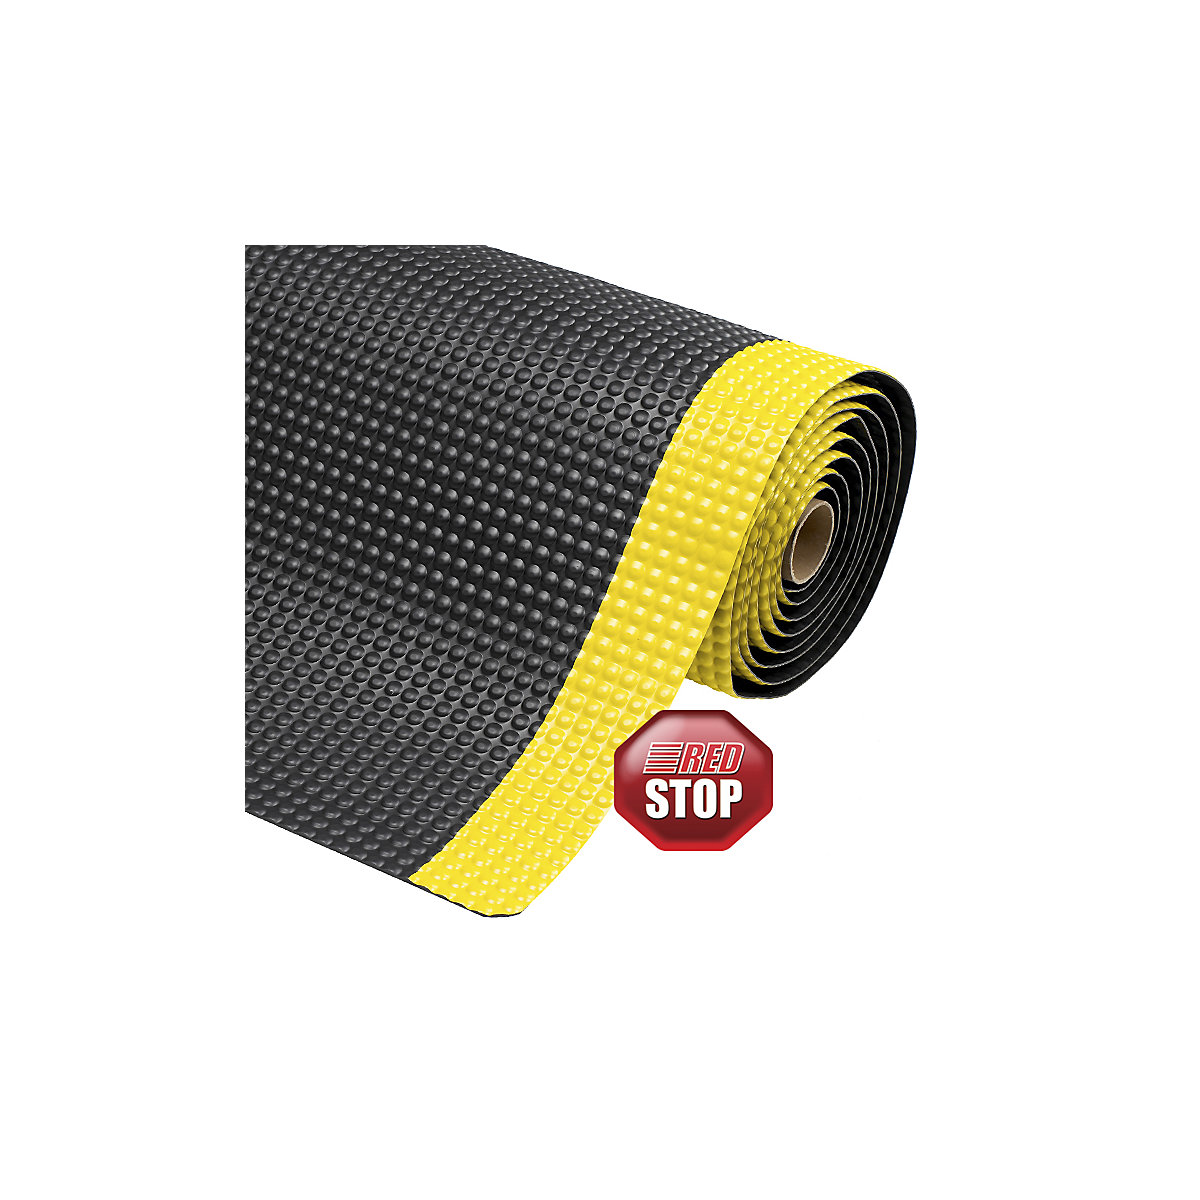 Sky Trax® workstation matting – NOTRAX, width 600 mm, sold by the metre, black / yellow-3